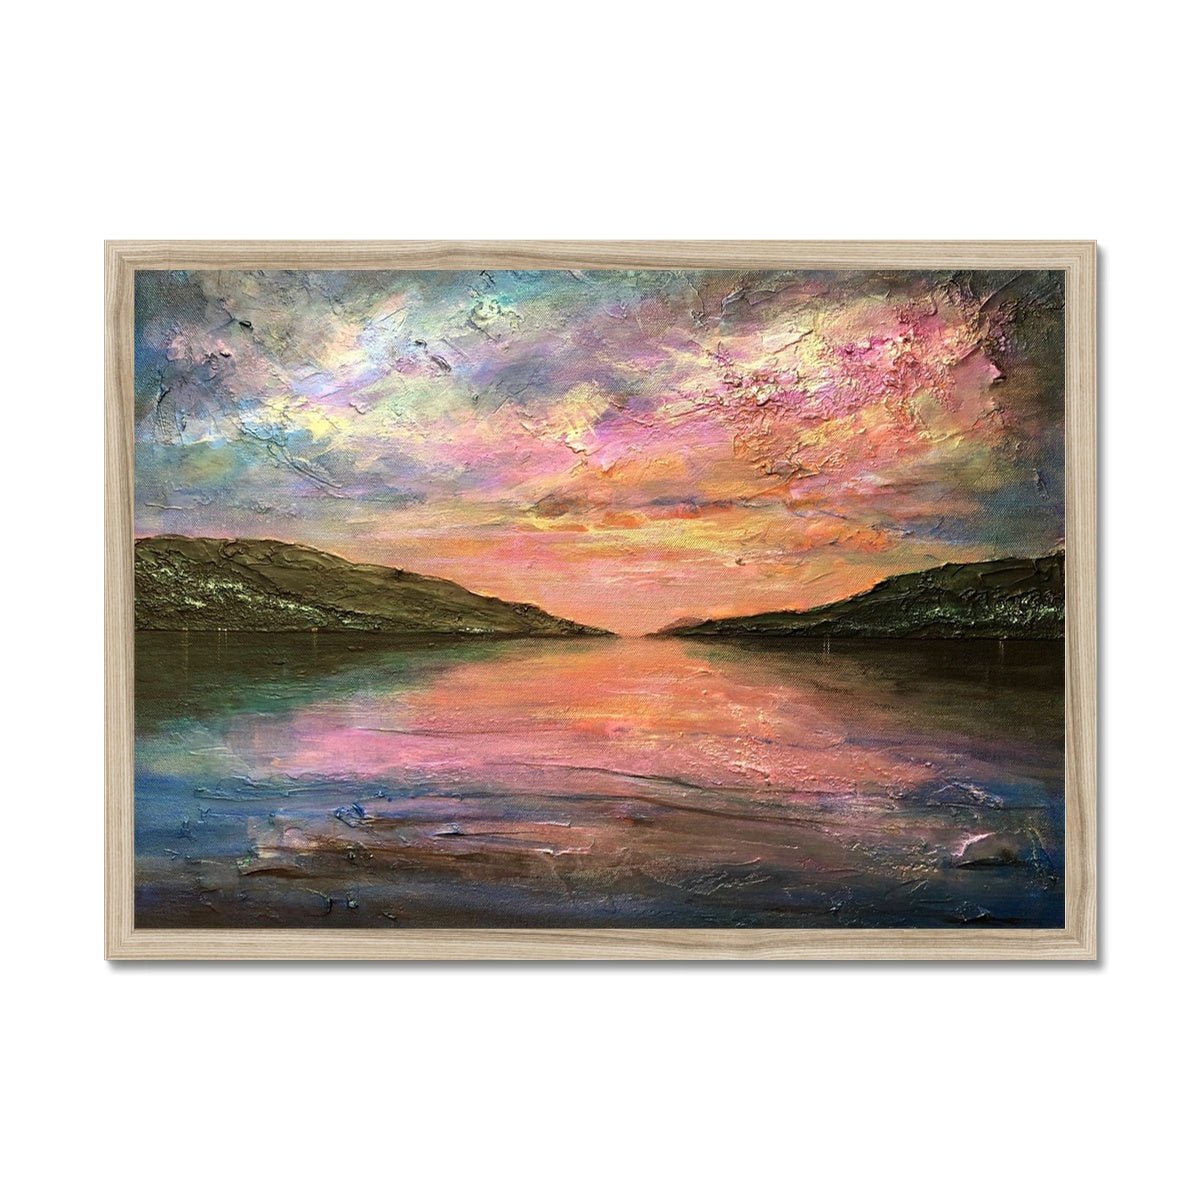 Loch Ness Dawn Painting | Framed Prints From Scotland-Framed Prints-Scottish Lochs & Mountains Art Gallery-A2 Landscape-Natural Frame-Paintings, Prints, Homeware, Art Gifts From Scotland By Scottish Artist Kevin Hunter